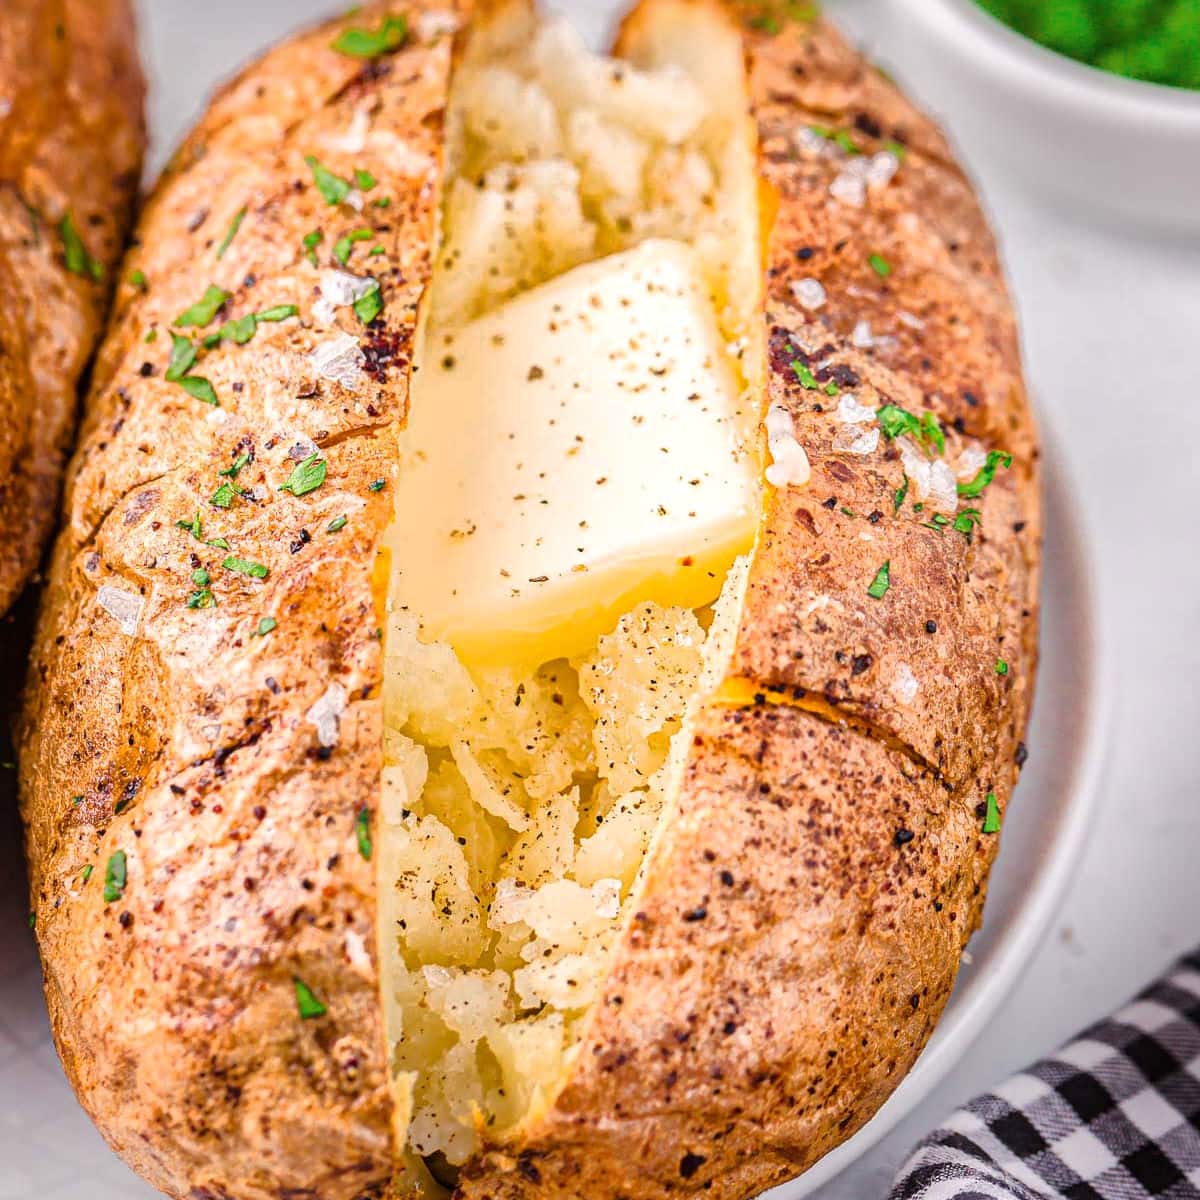 The BEST Air Fryer Baked Potato Recipe - Mom On Timeout